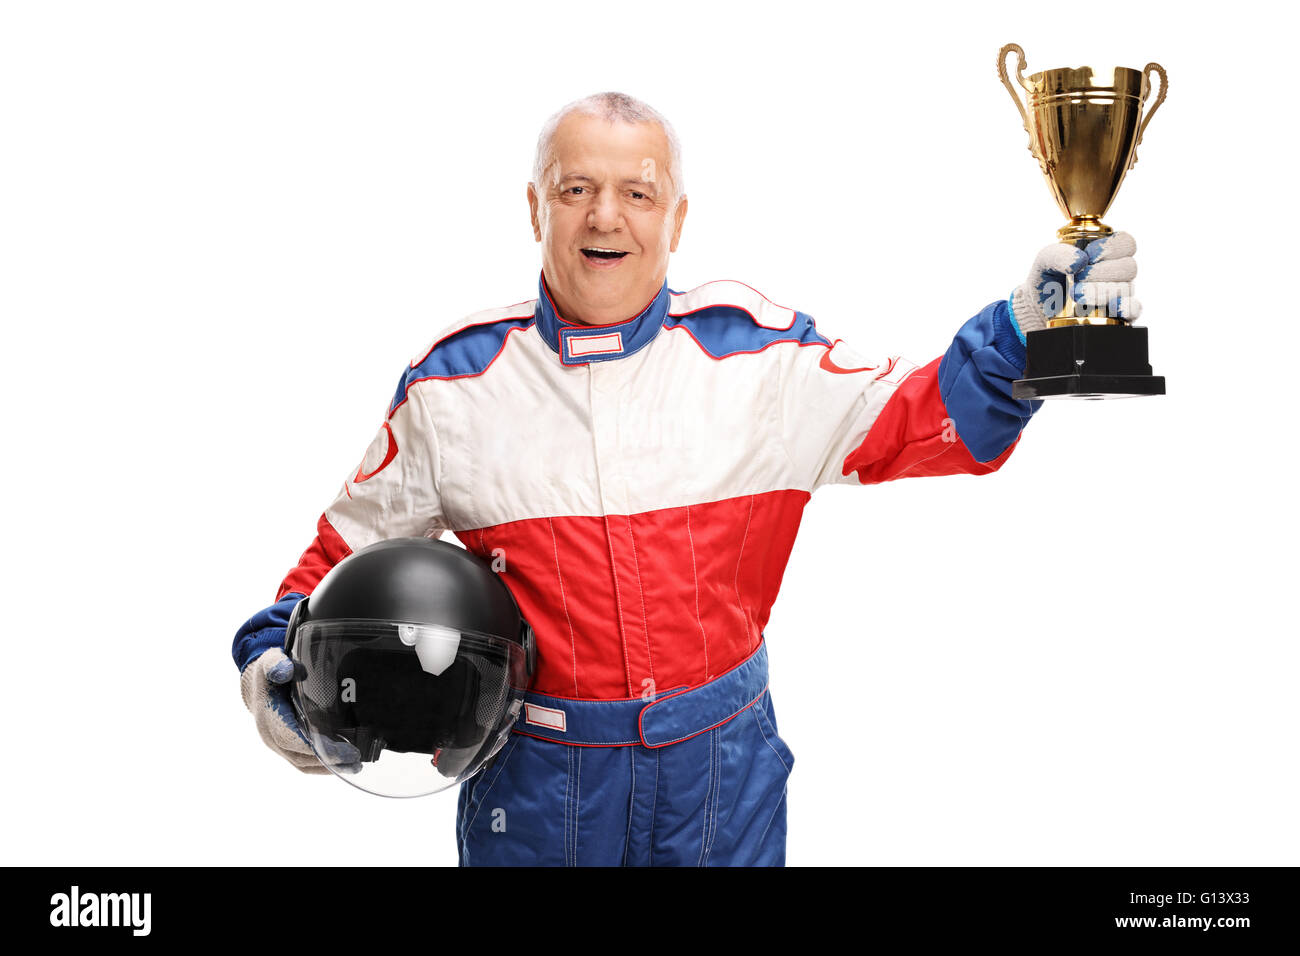 Studio shot of a senior car racing champion holding a trophy isolated on white background Stock Photo